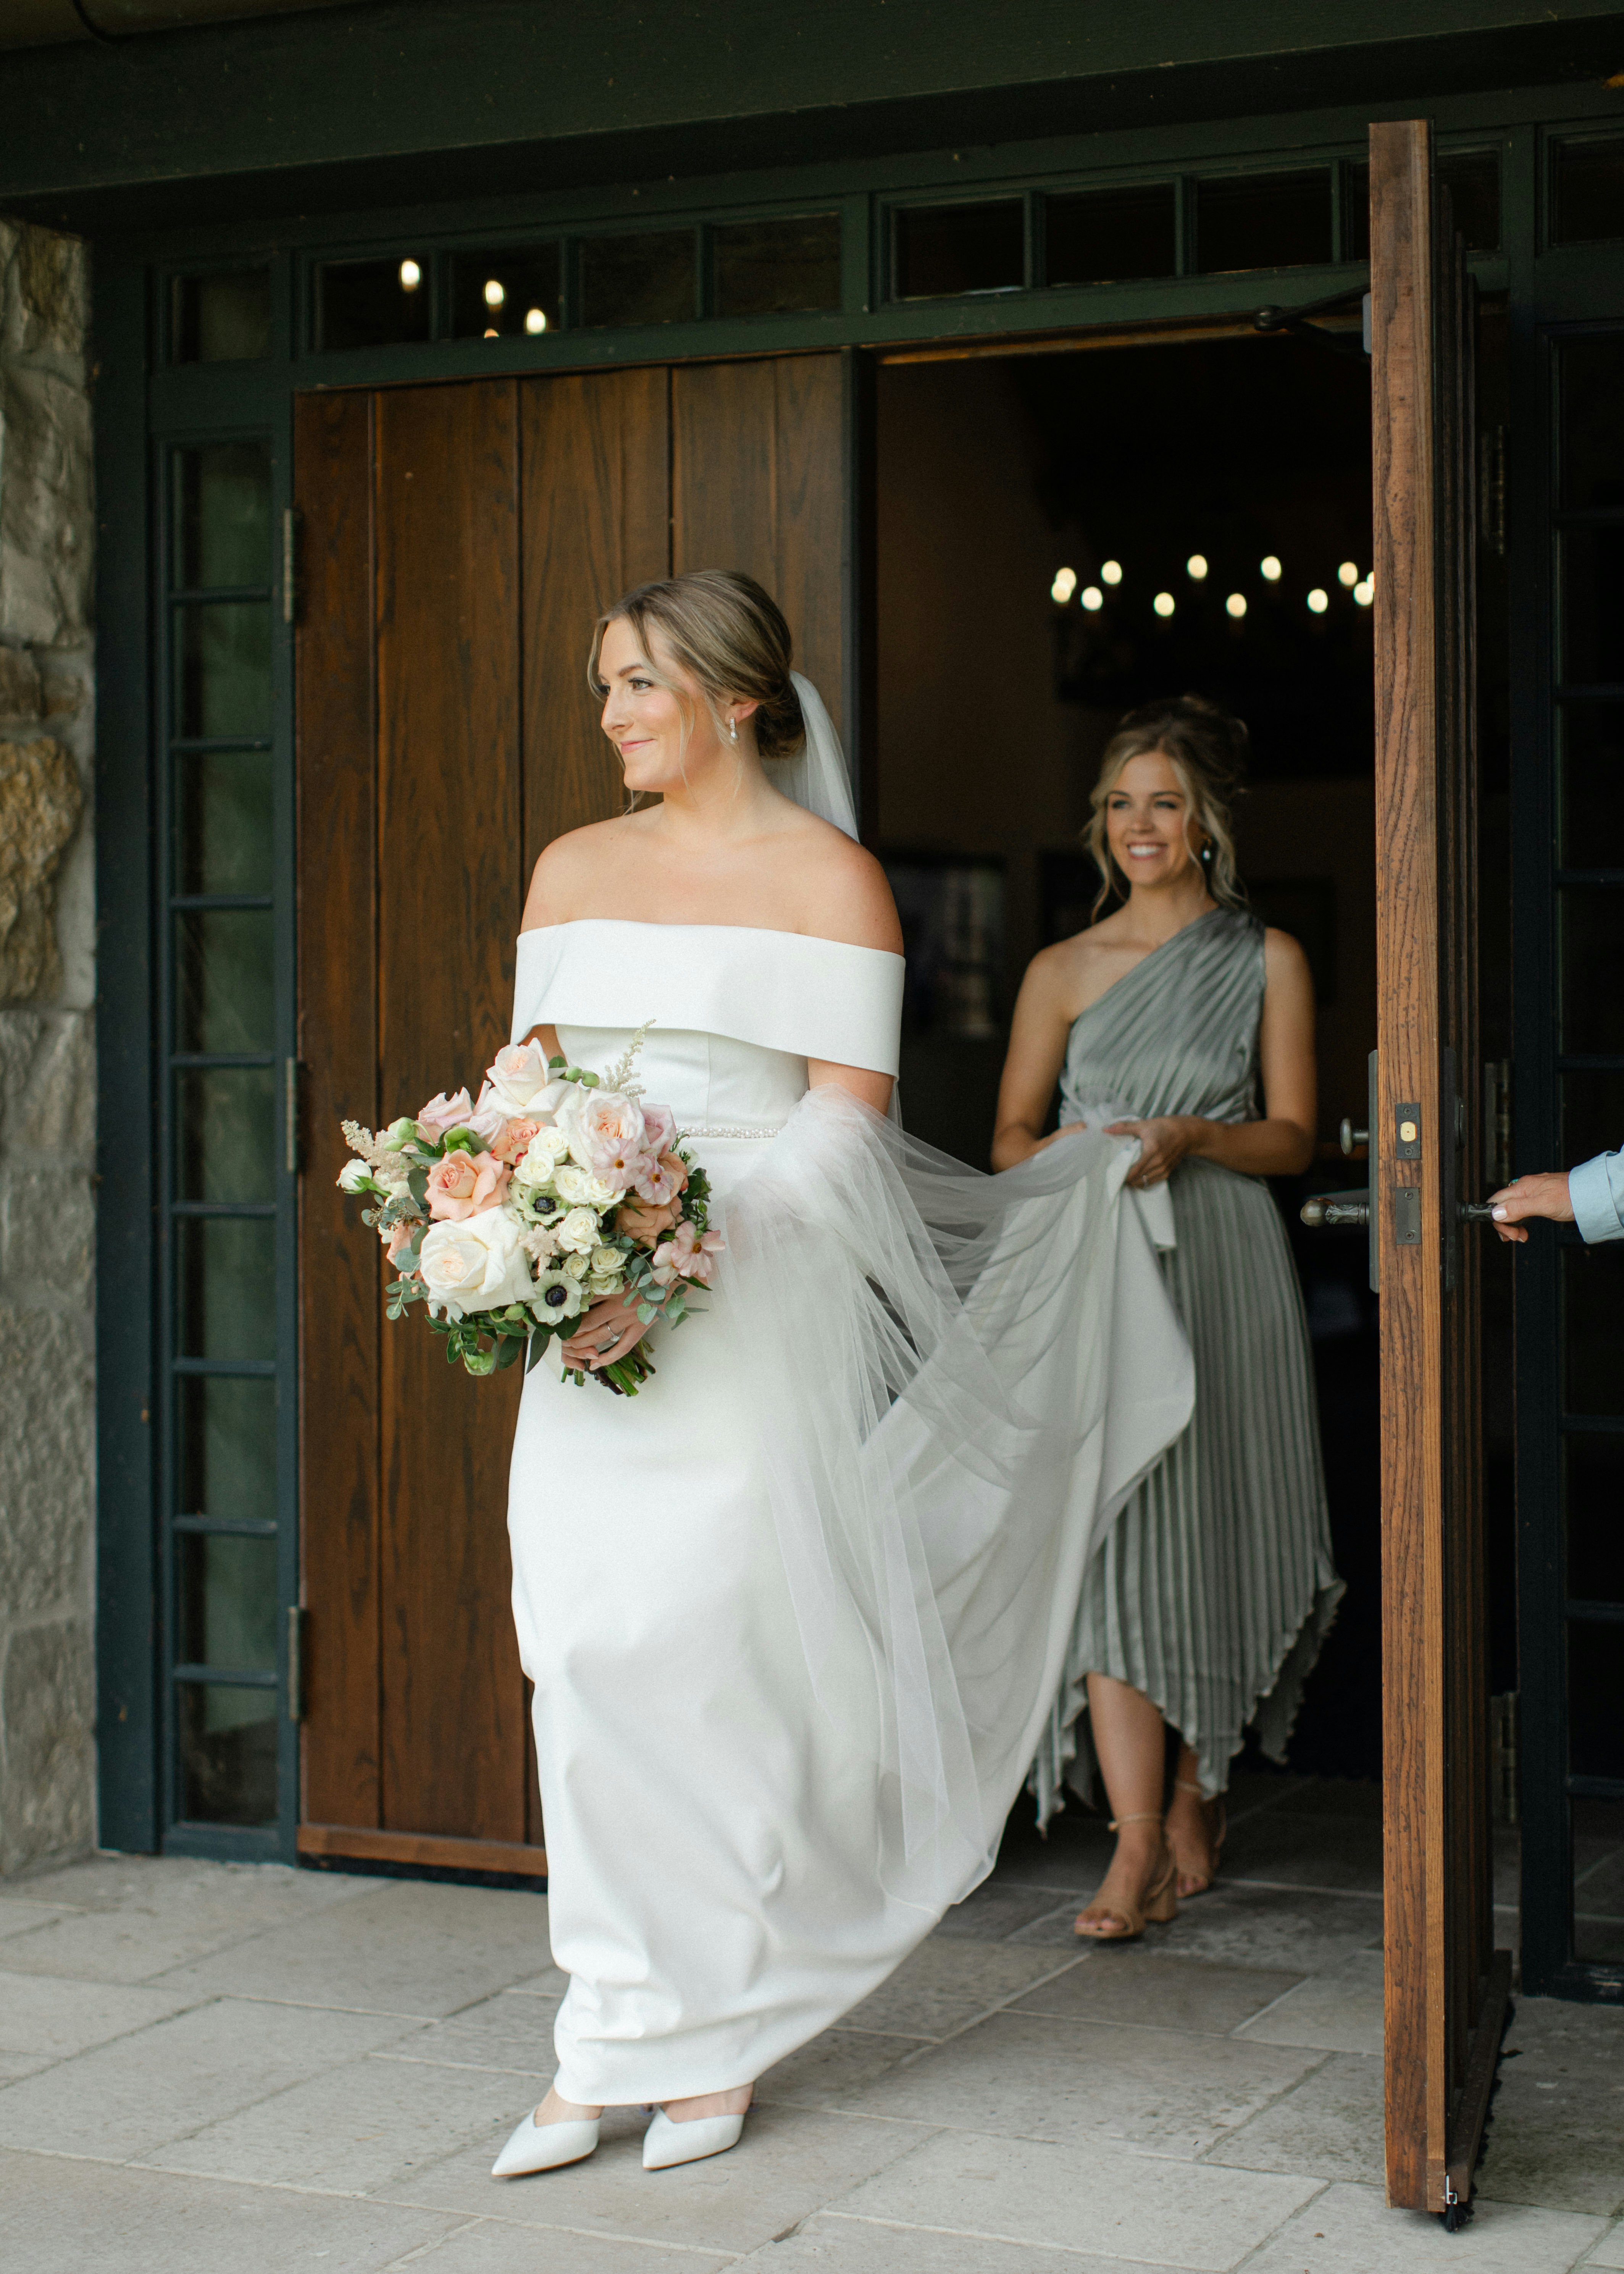 A bride and her bridesmaid | Source: Unsplash